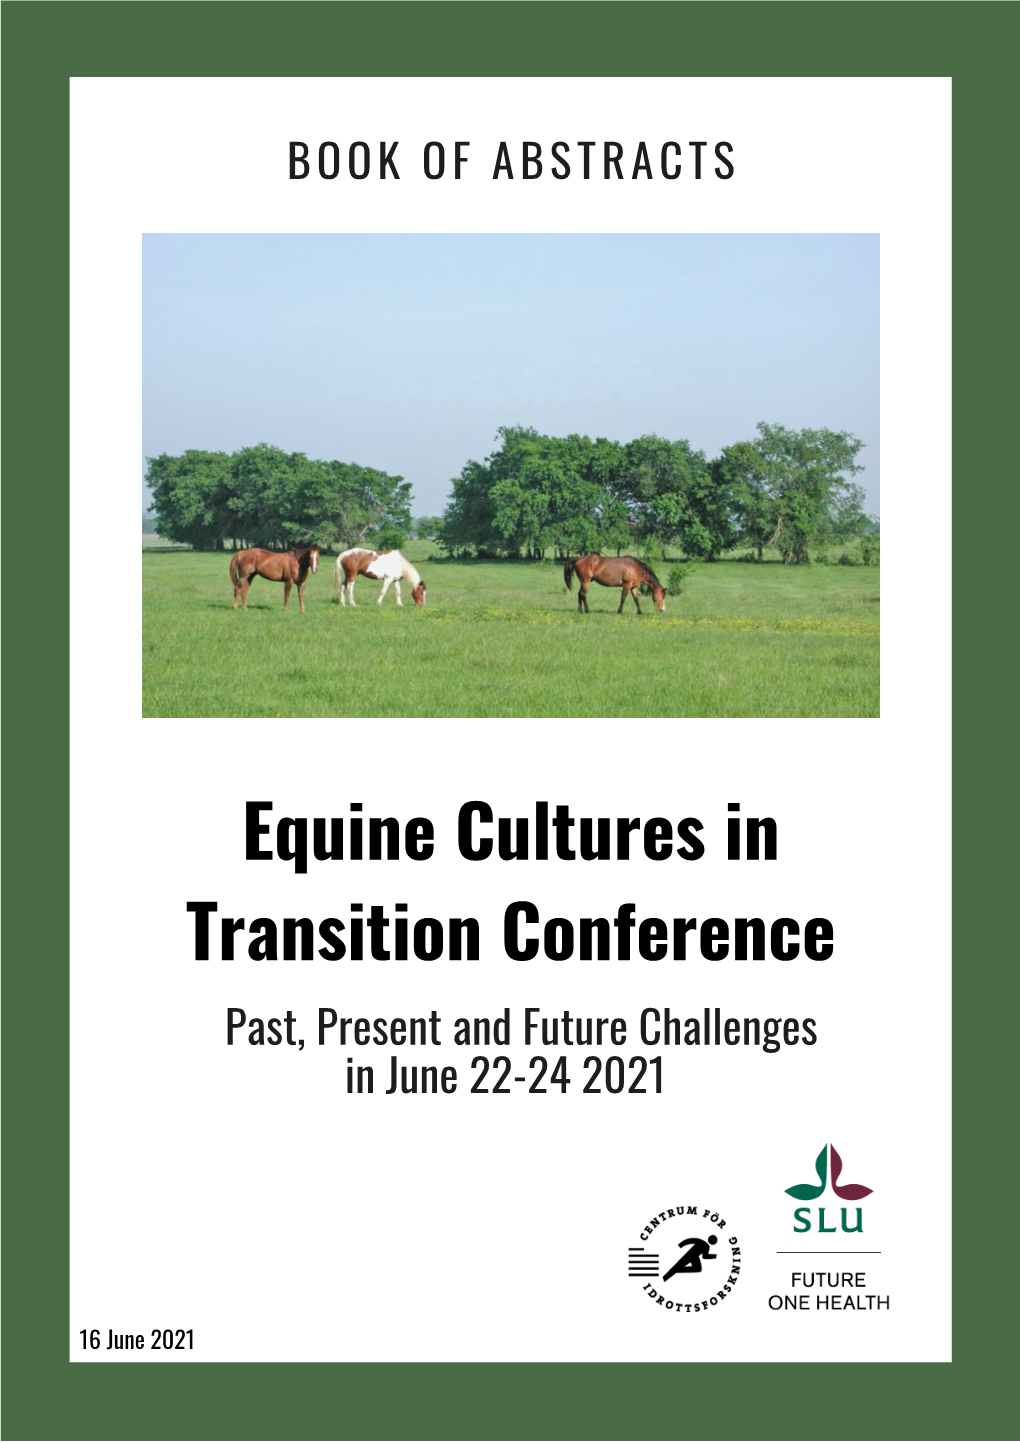 Abstracts to Be Presented at Equine Cultures in Transition 2021